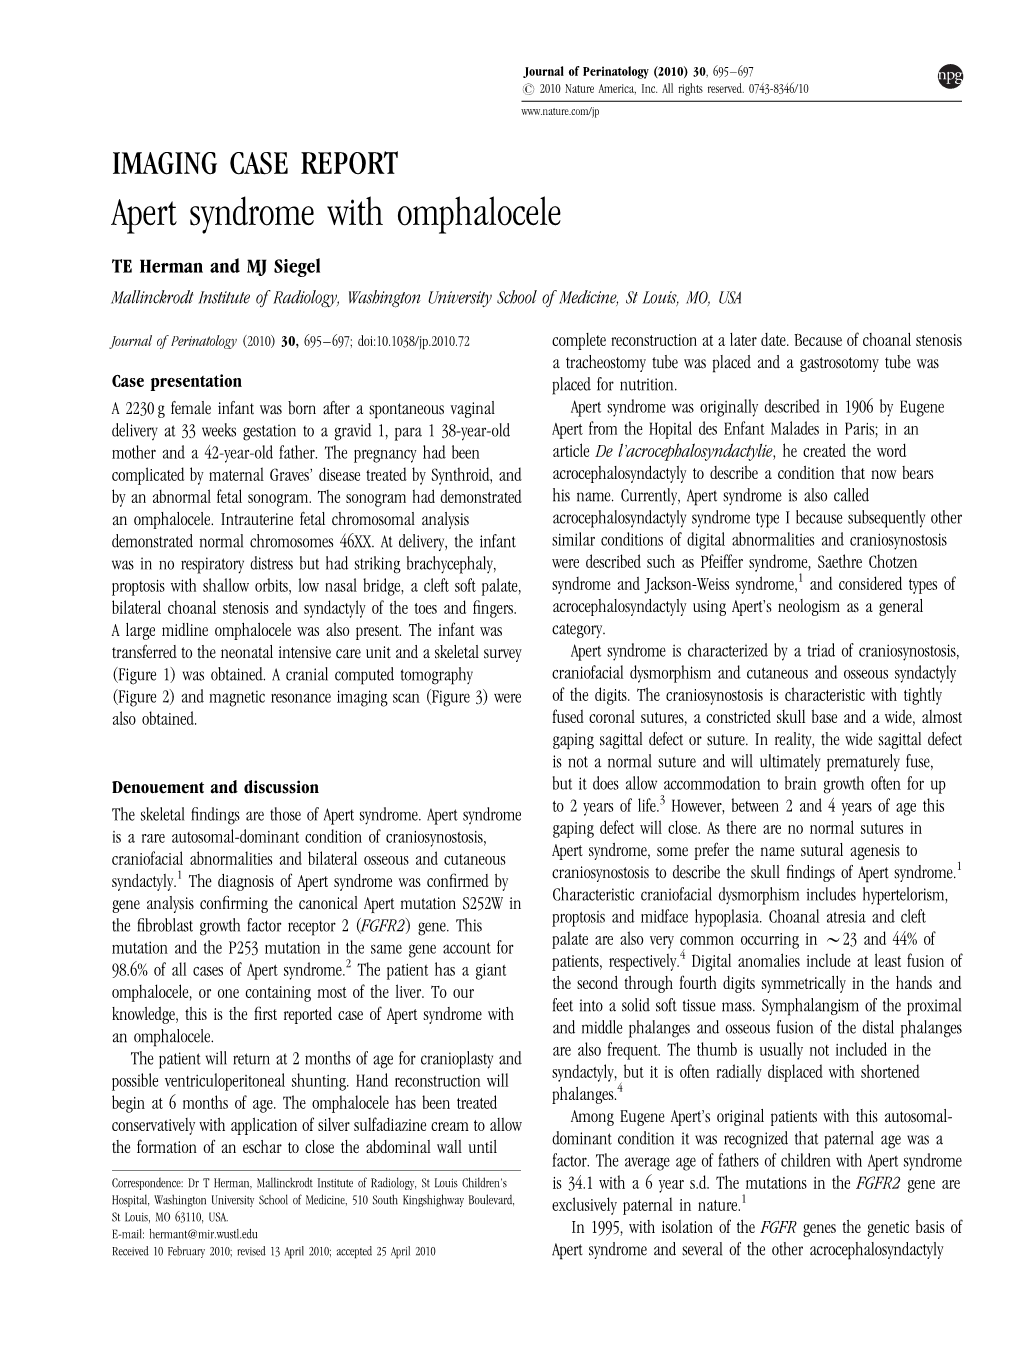 IMAGING CASE REPORT Apert Syndrome with Omphalocele